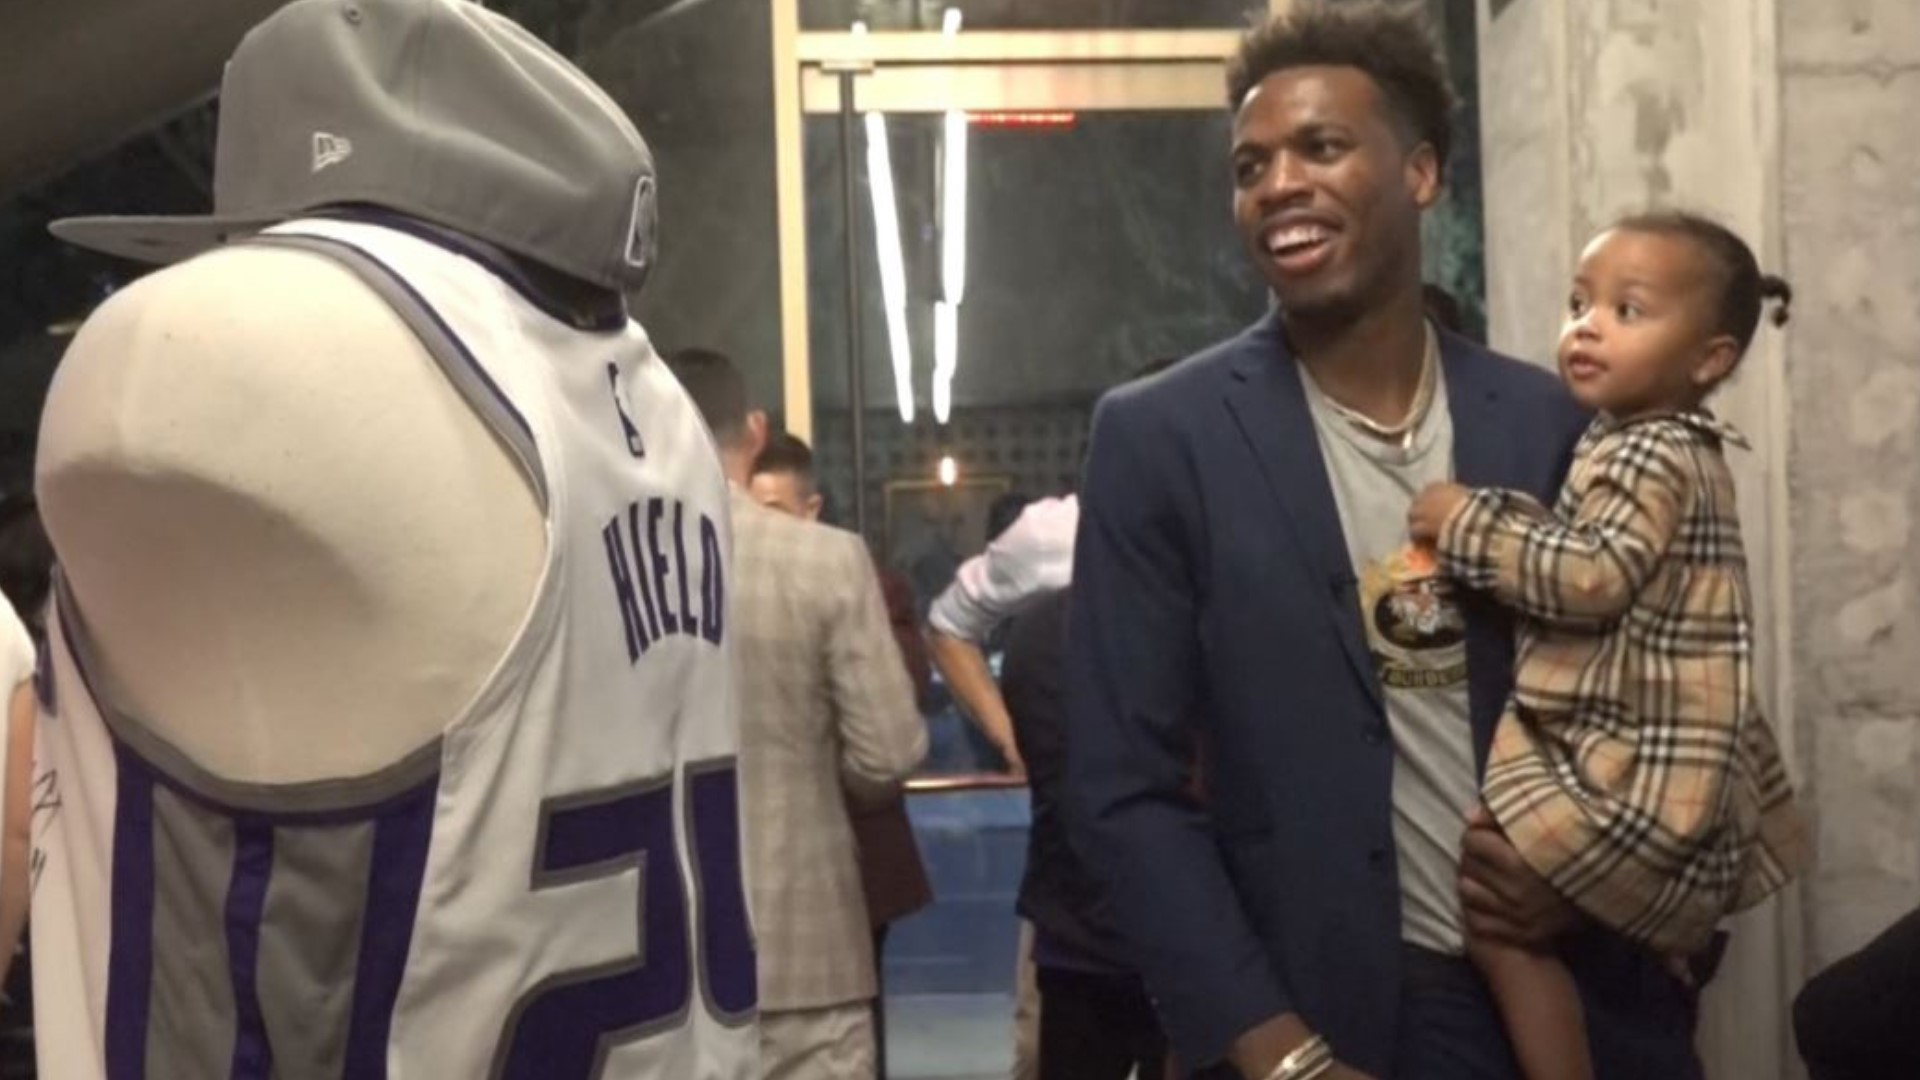 Sacramento Kings star Buddy Hield continues his fundraising efforts to rebuild his native Bahamas after Hurricane Dorian devastated the island in August.